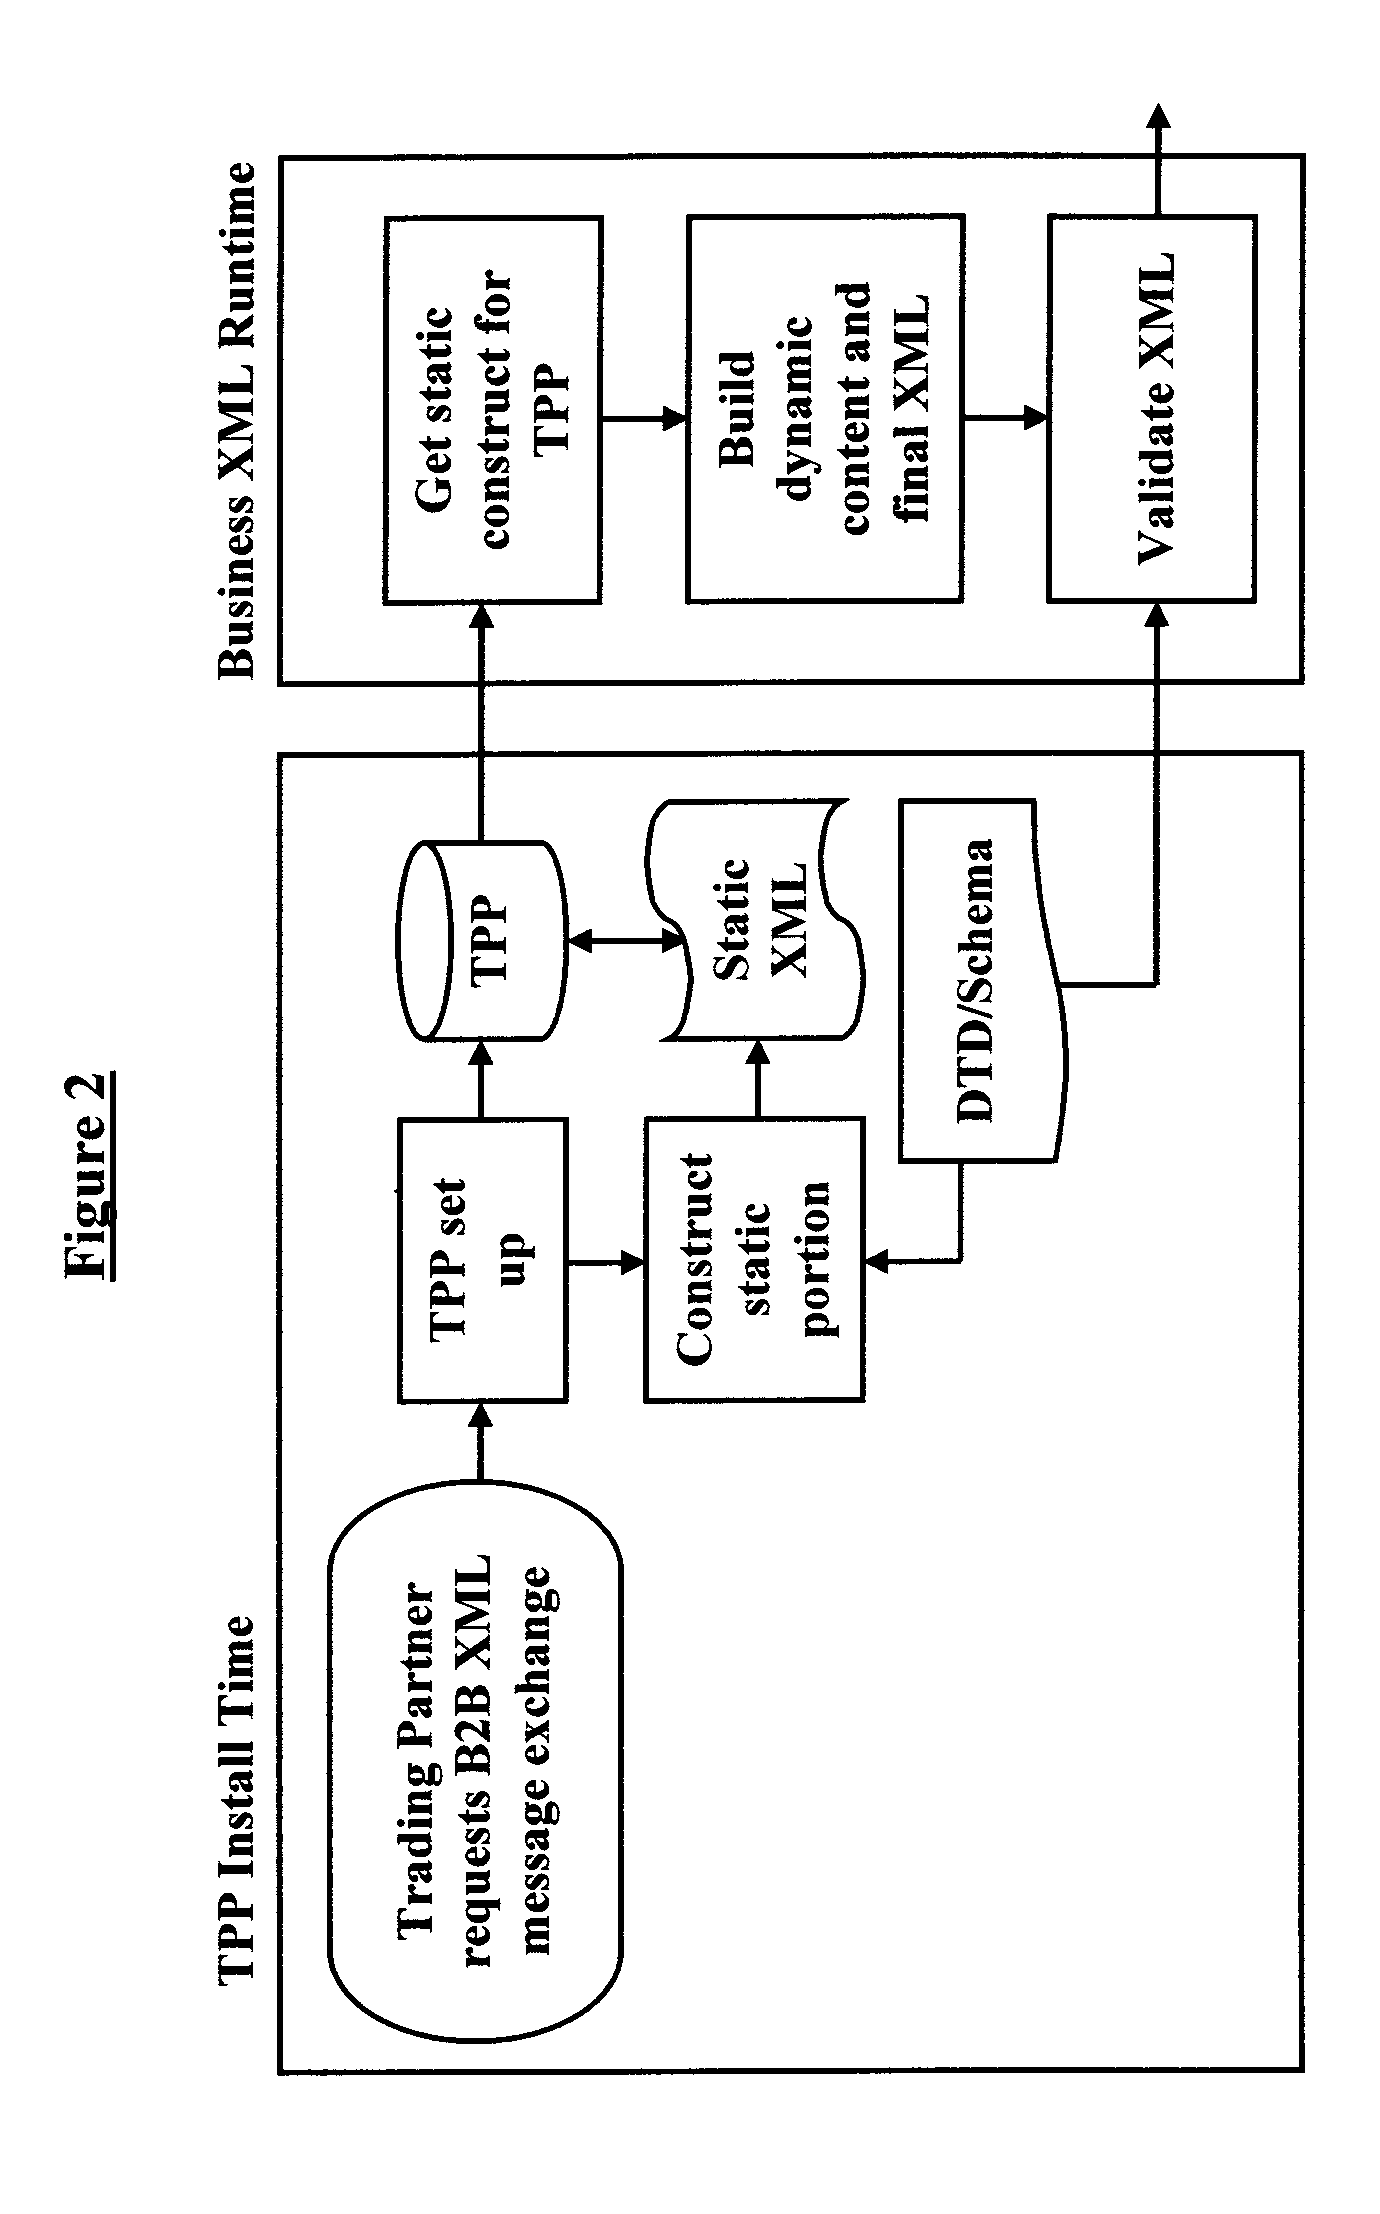 System and method for speeding XML construction for a business transaction using prebuilt XML with static and dynamic sections